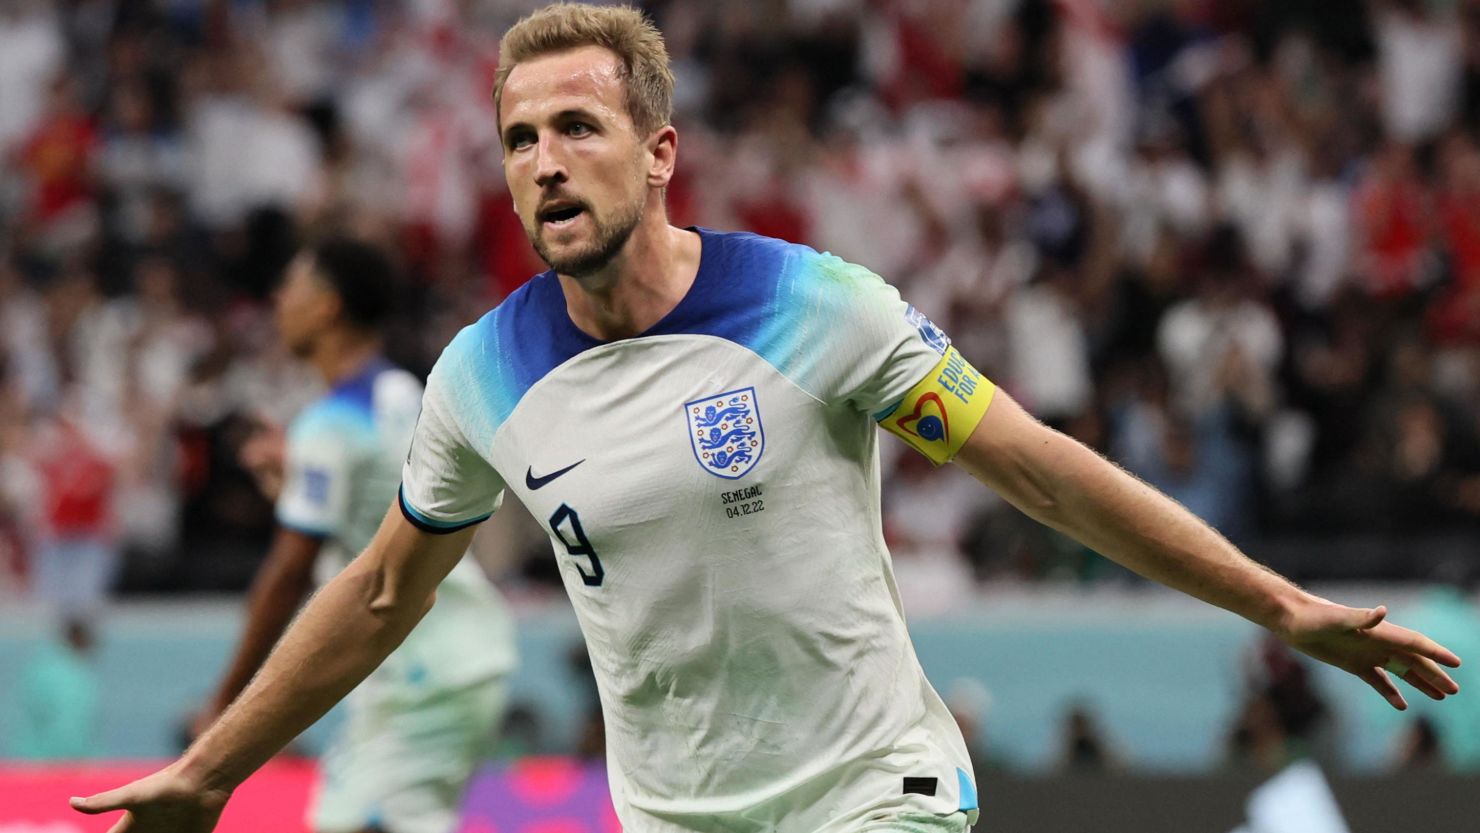 Harry Kane celebrates celebrates after scoring his first goal of the World Cup.